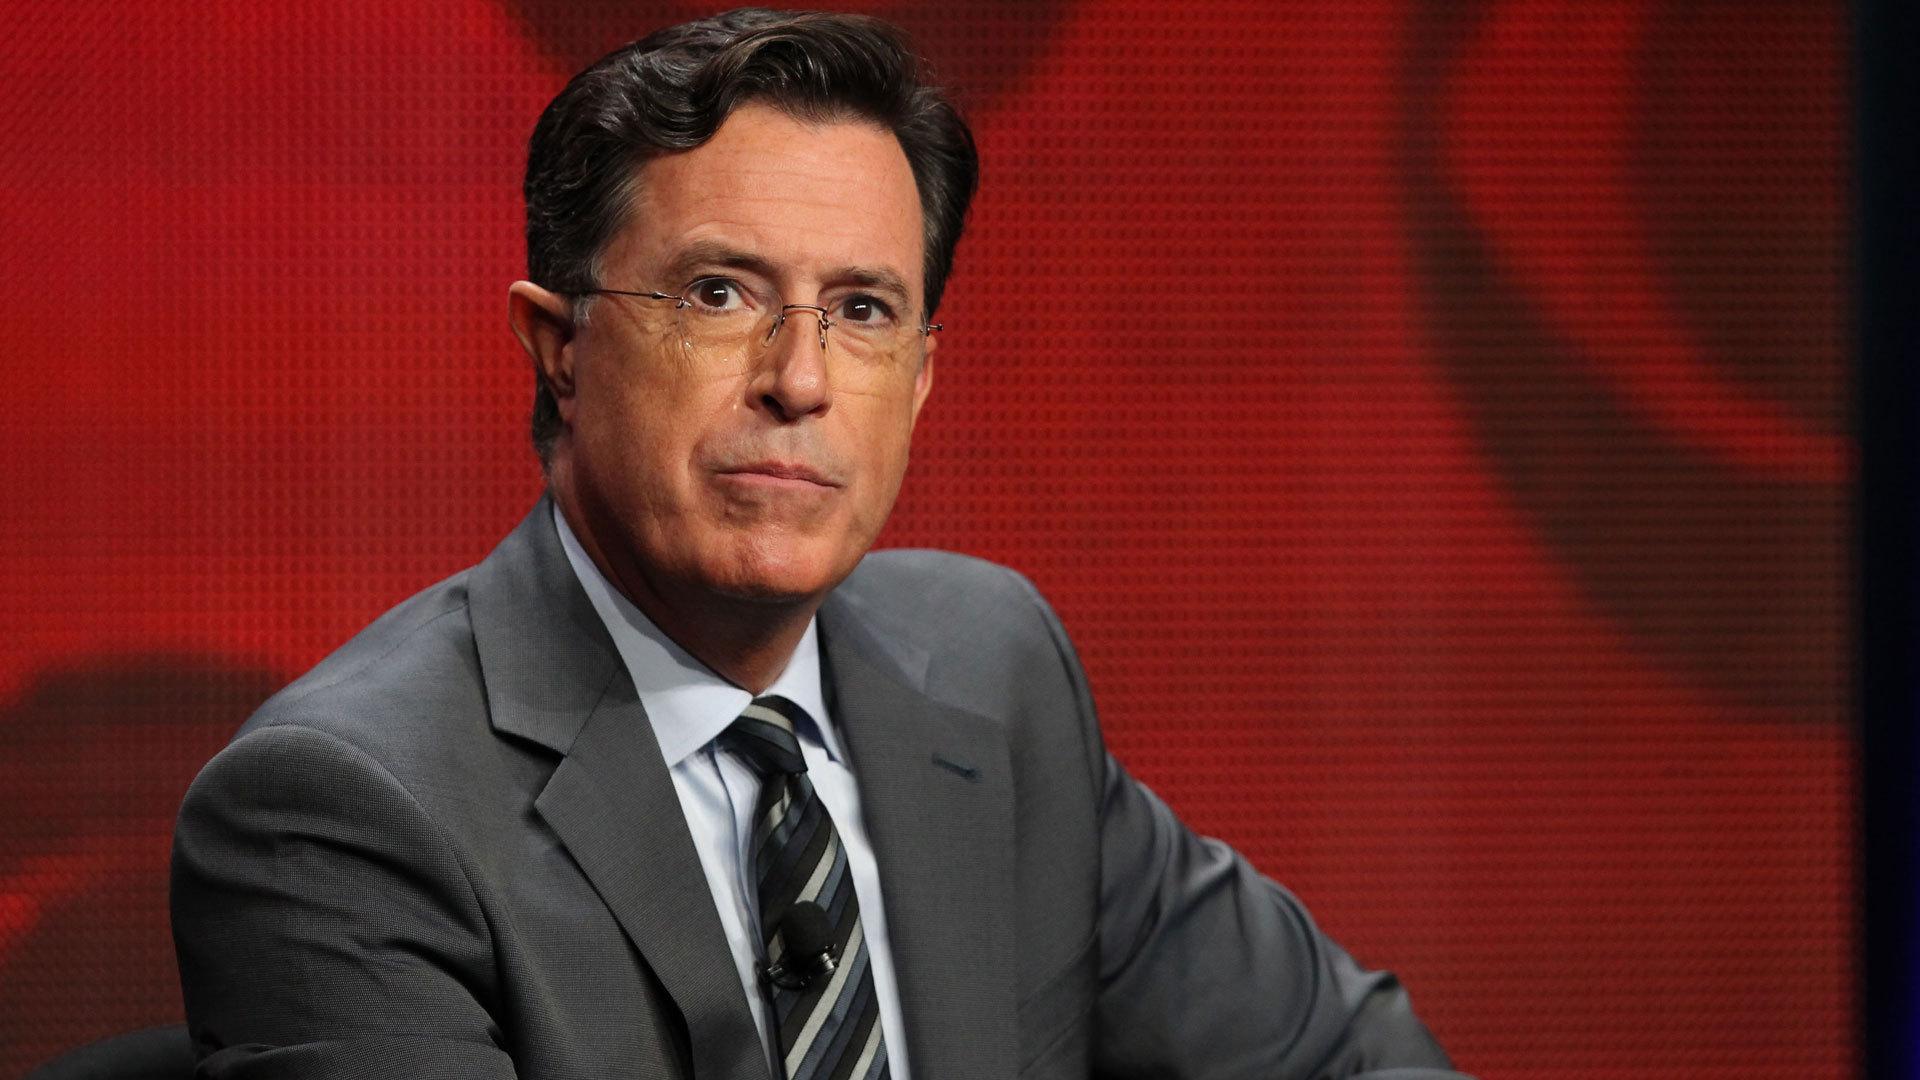 Stephen Colbert Wallpapers Image Photos Pictures Backgrounds.